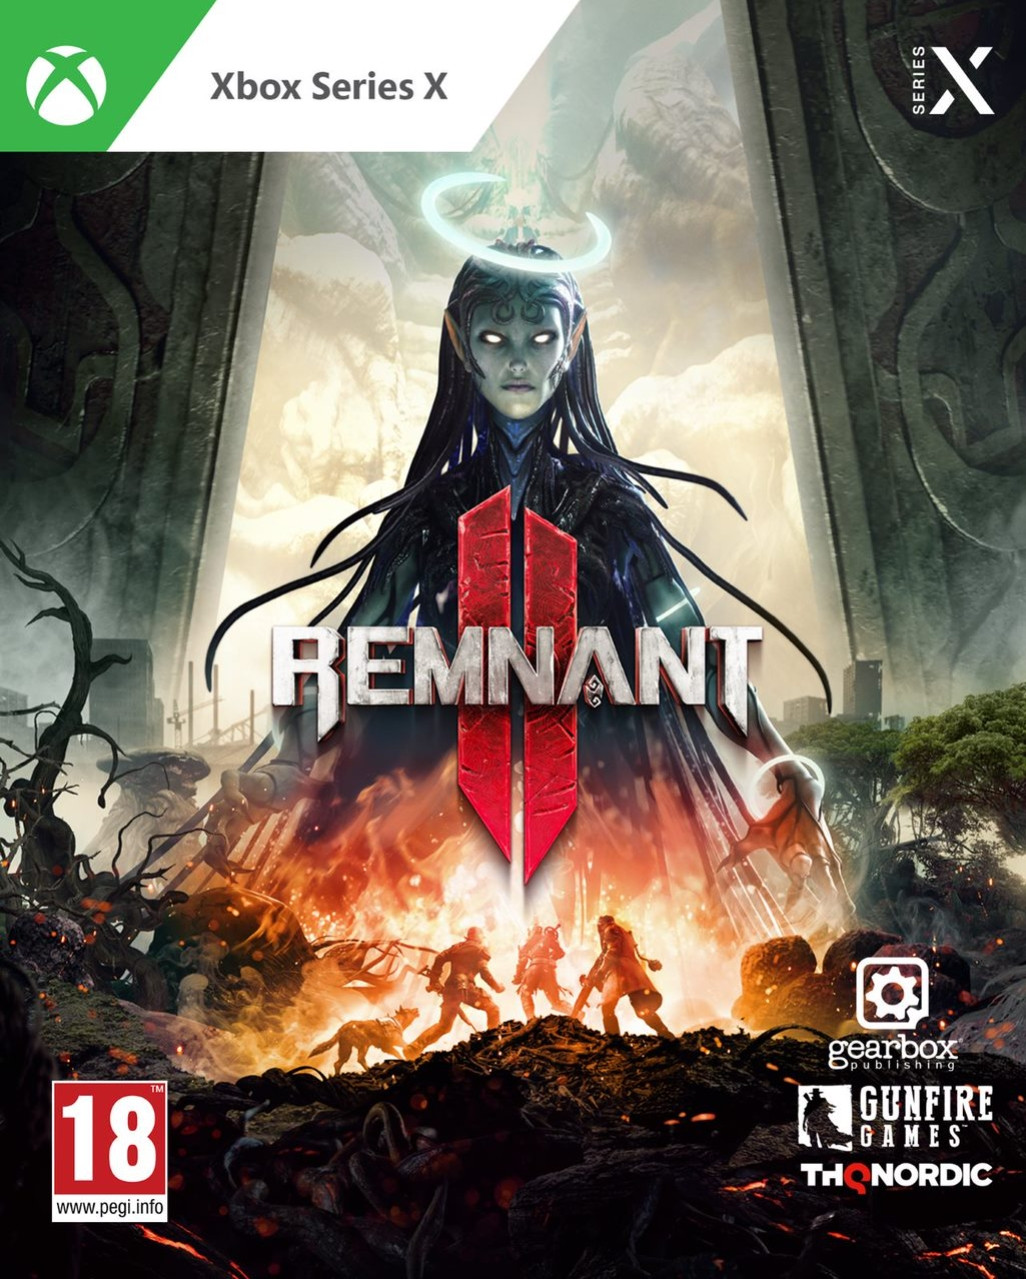 Remnant 2 (Xbox Series X), THQ Nordic